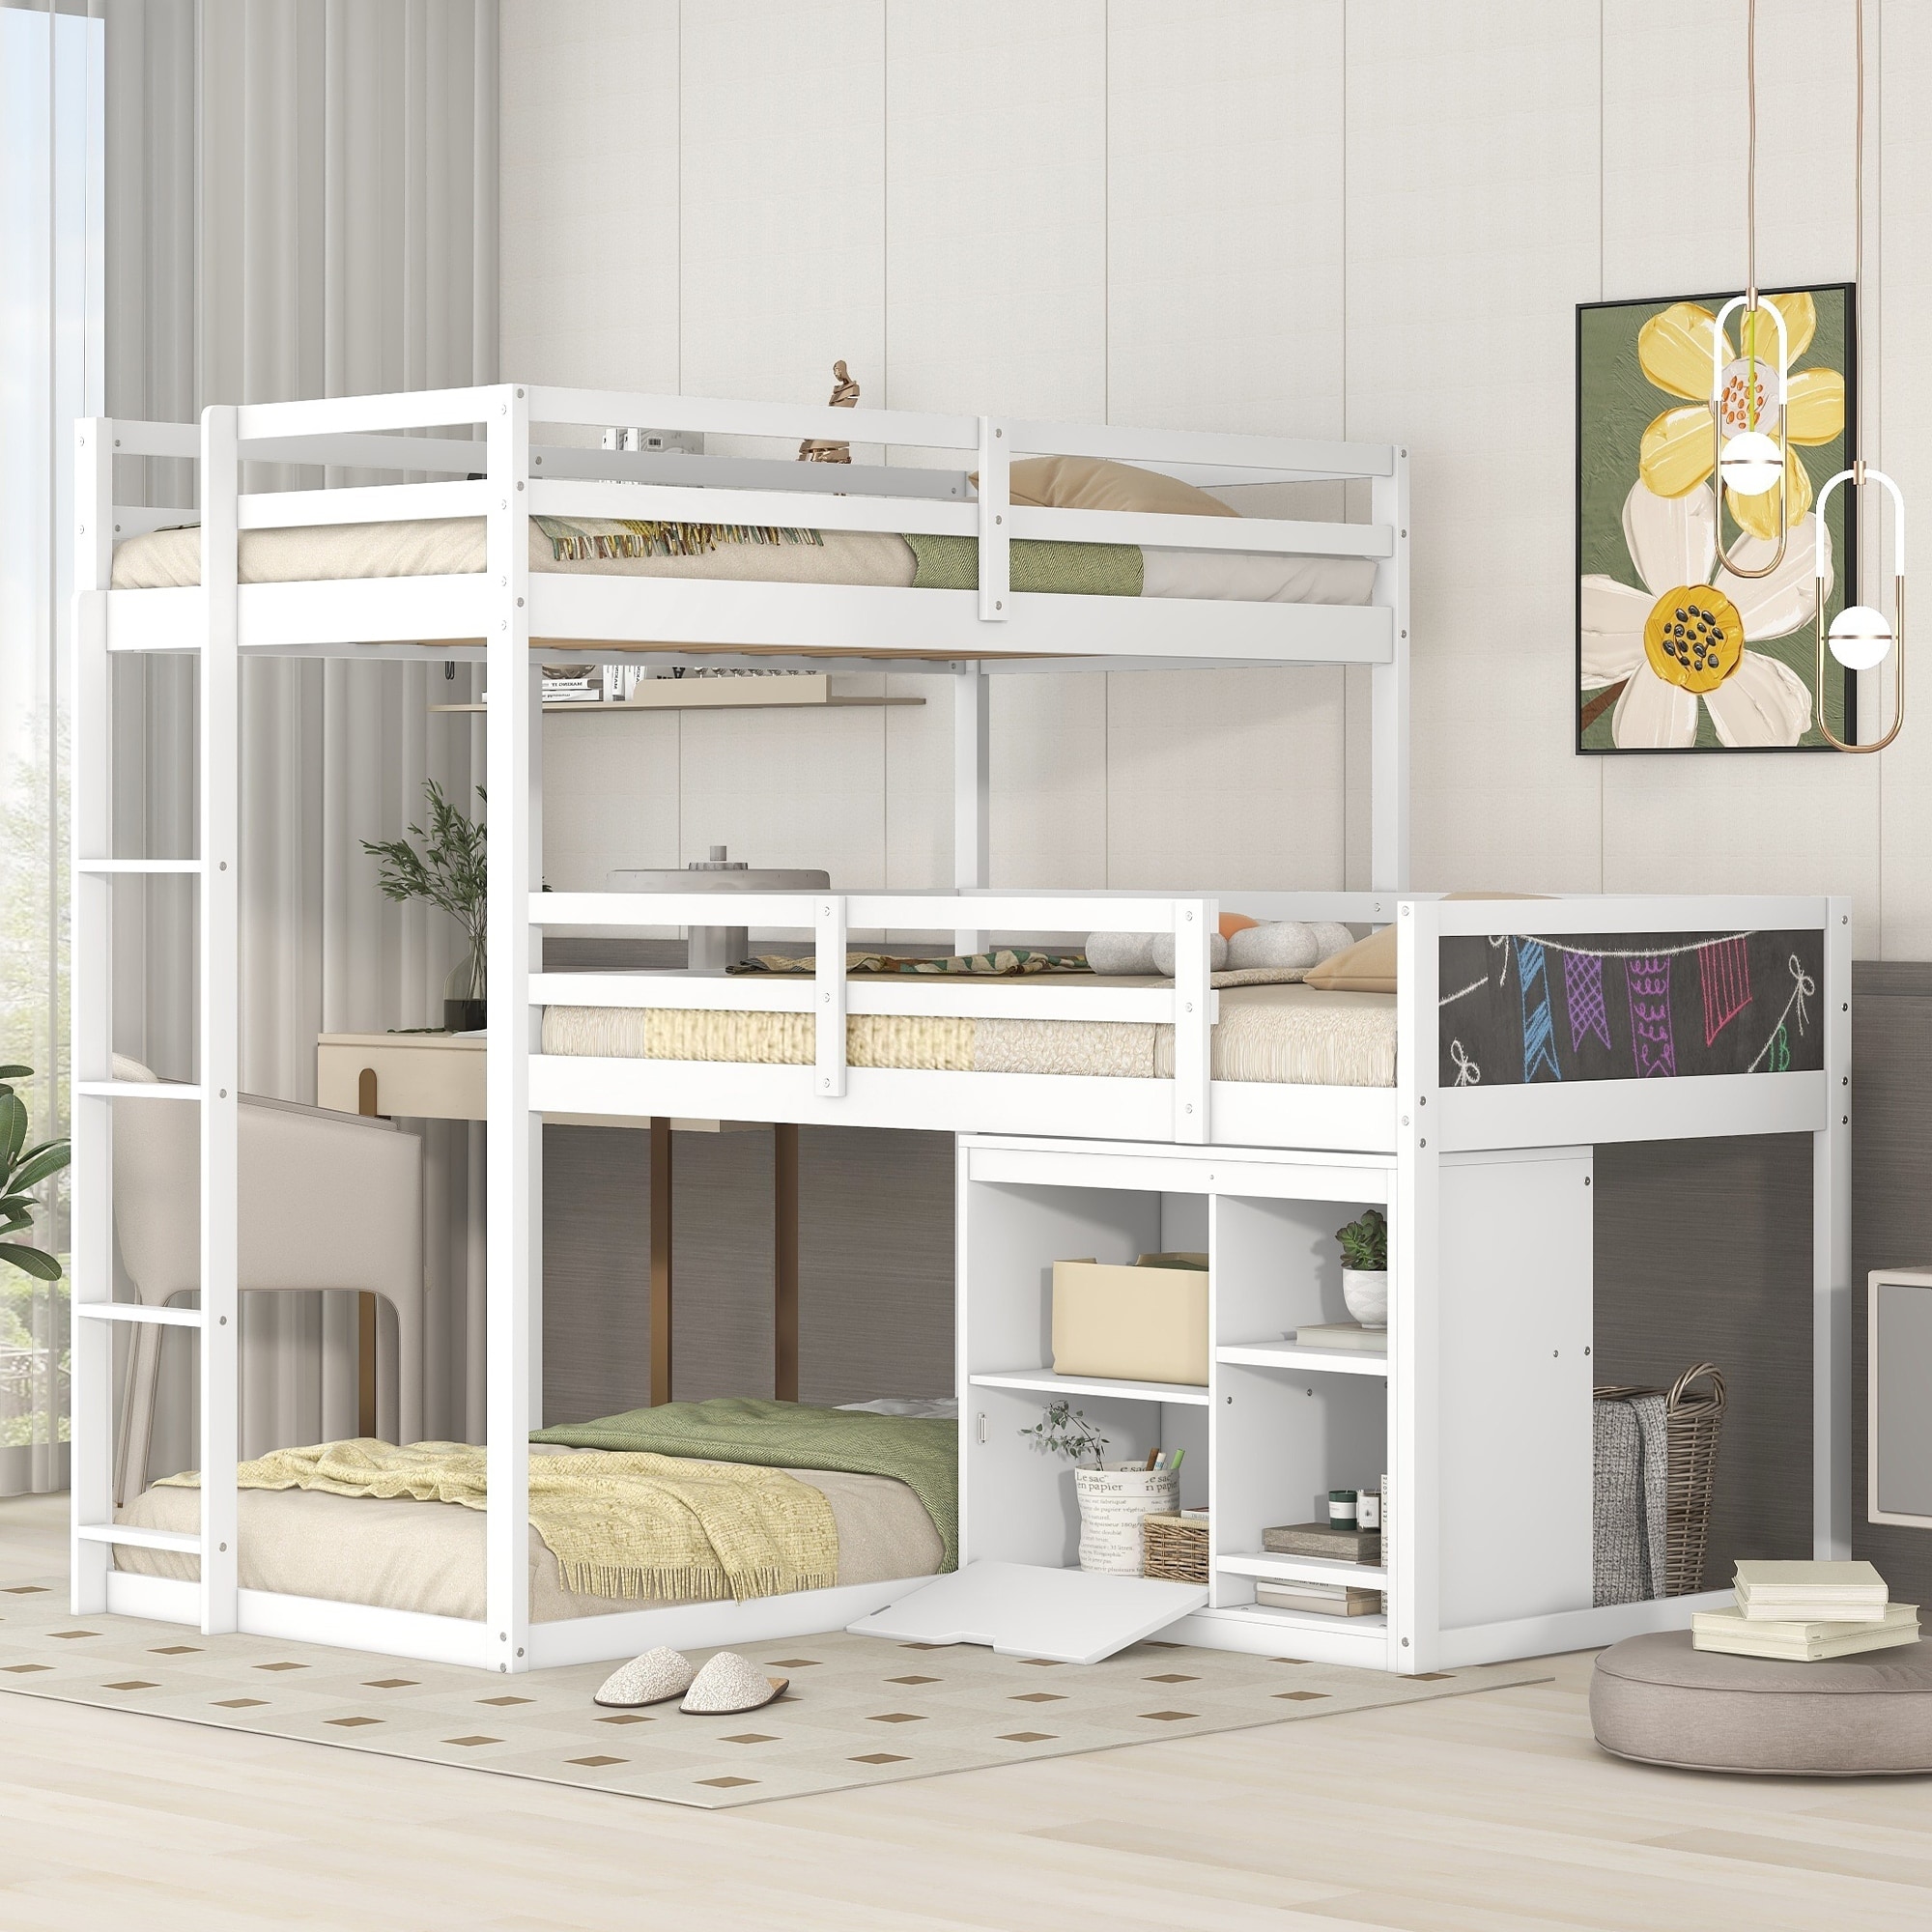 L-Shaped Triple Bunk Bed with Storage Cabinet, Blackboard, and Space-Saving Design